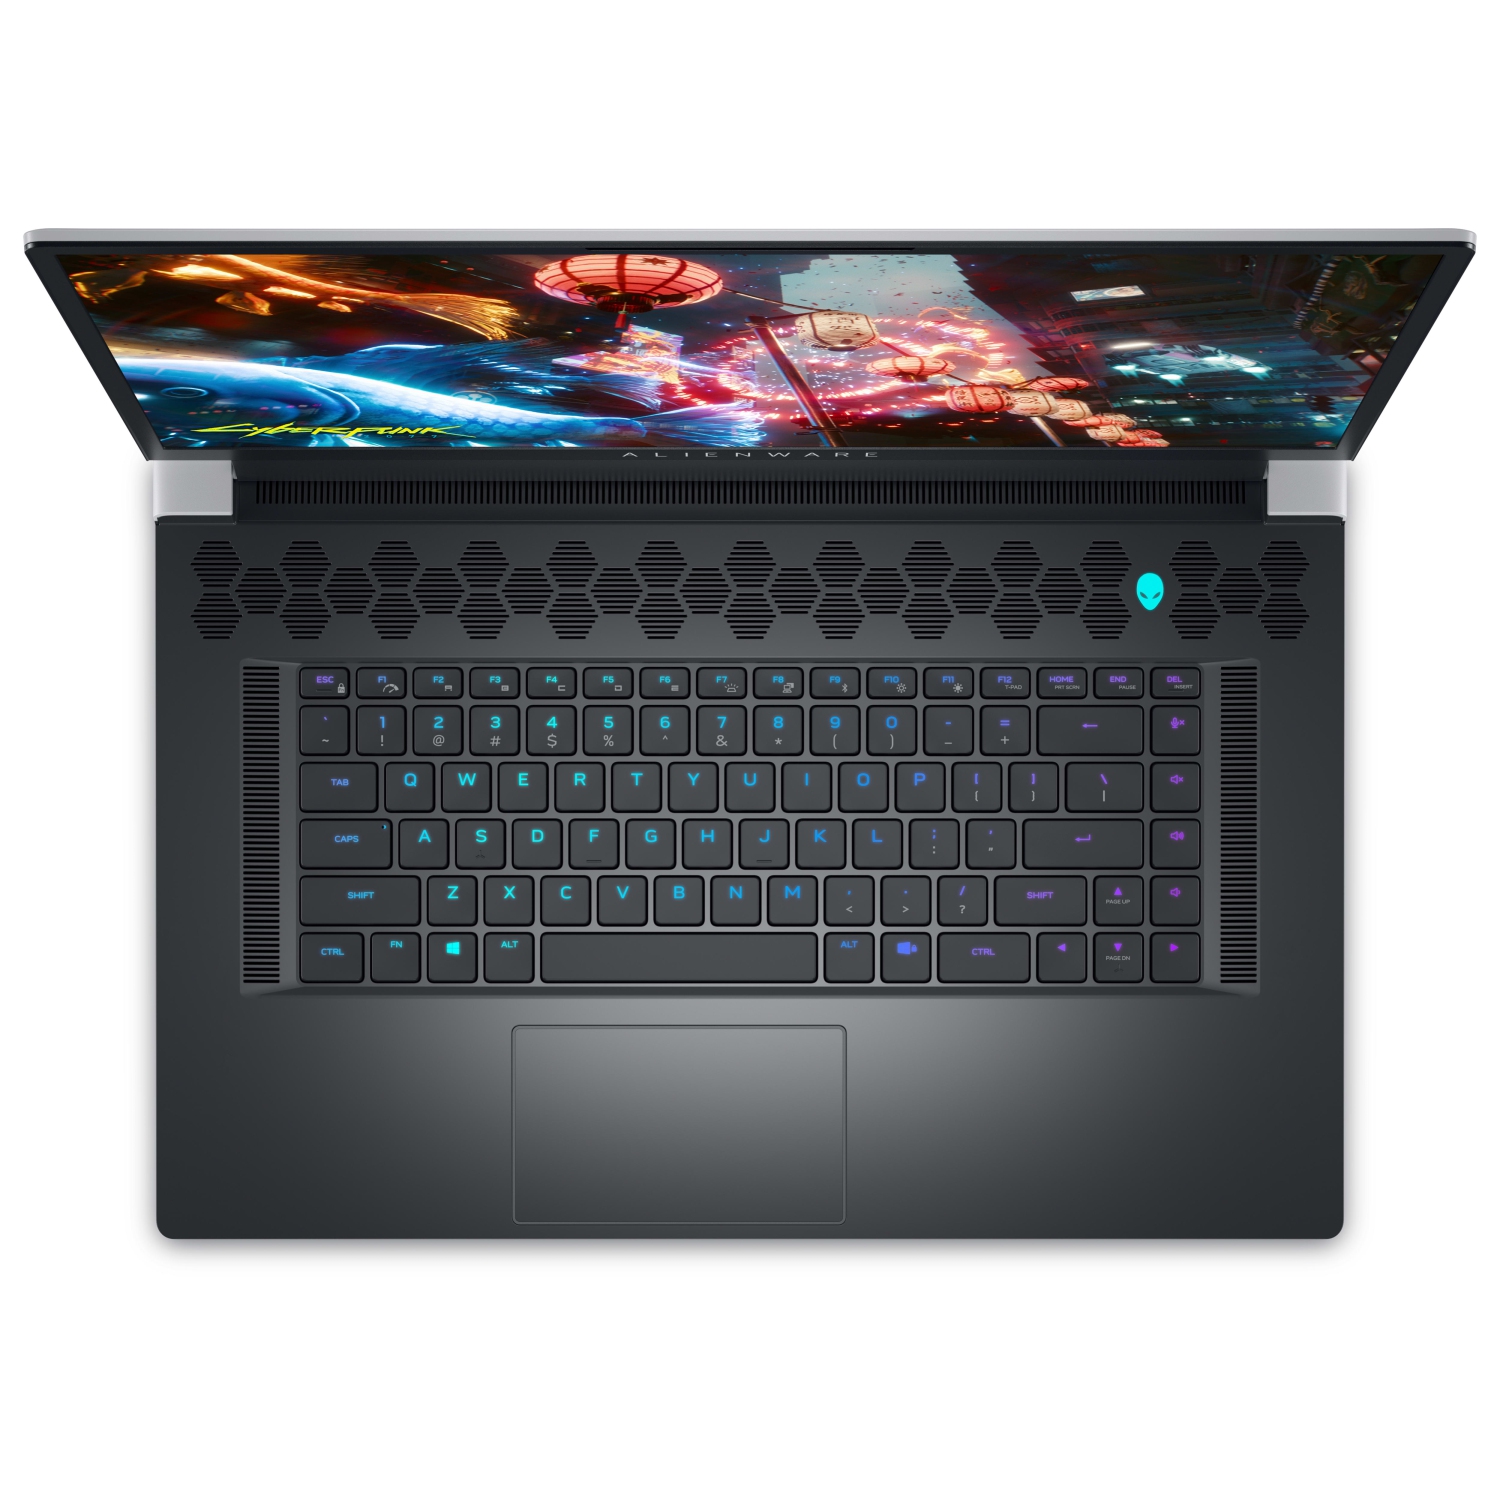 Refurbished (Excellent) – Dell Alienware X17 R2 Gaming Laptop (2022) | 17.3" FHD | Core i9 - 512GB SSD - 32GB RAM - RTX 3080 | 14 Cores @ 5 GHz - 12th Gen CPU - 8GB GDDR6X